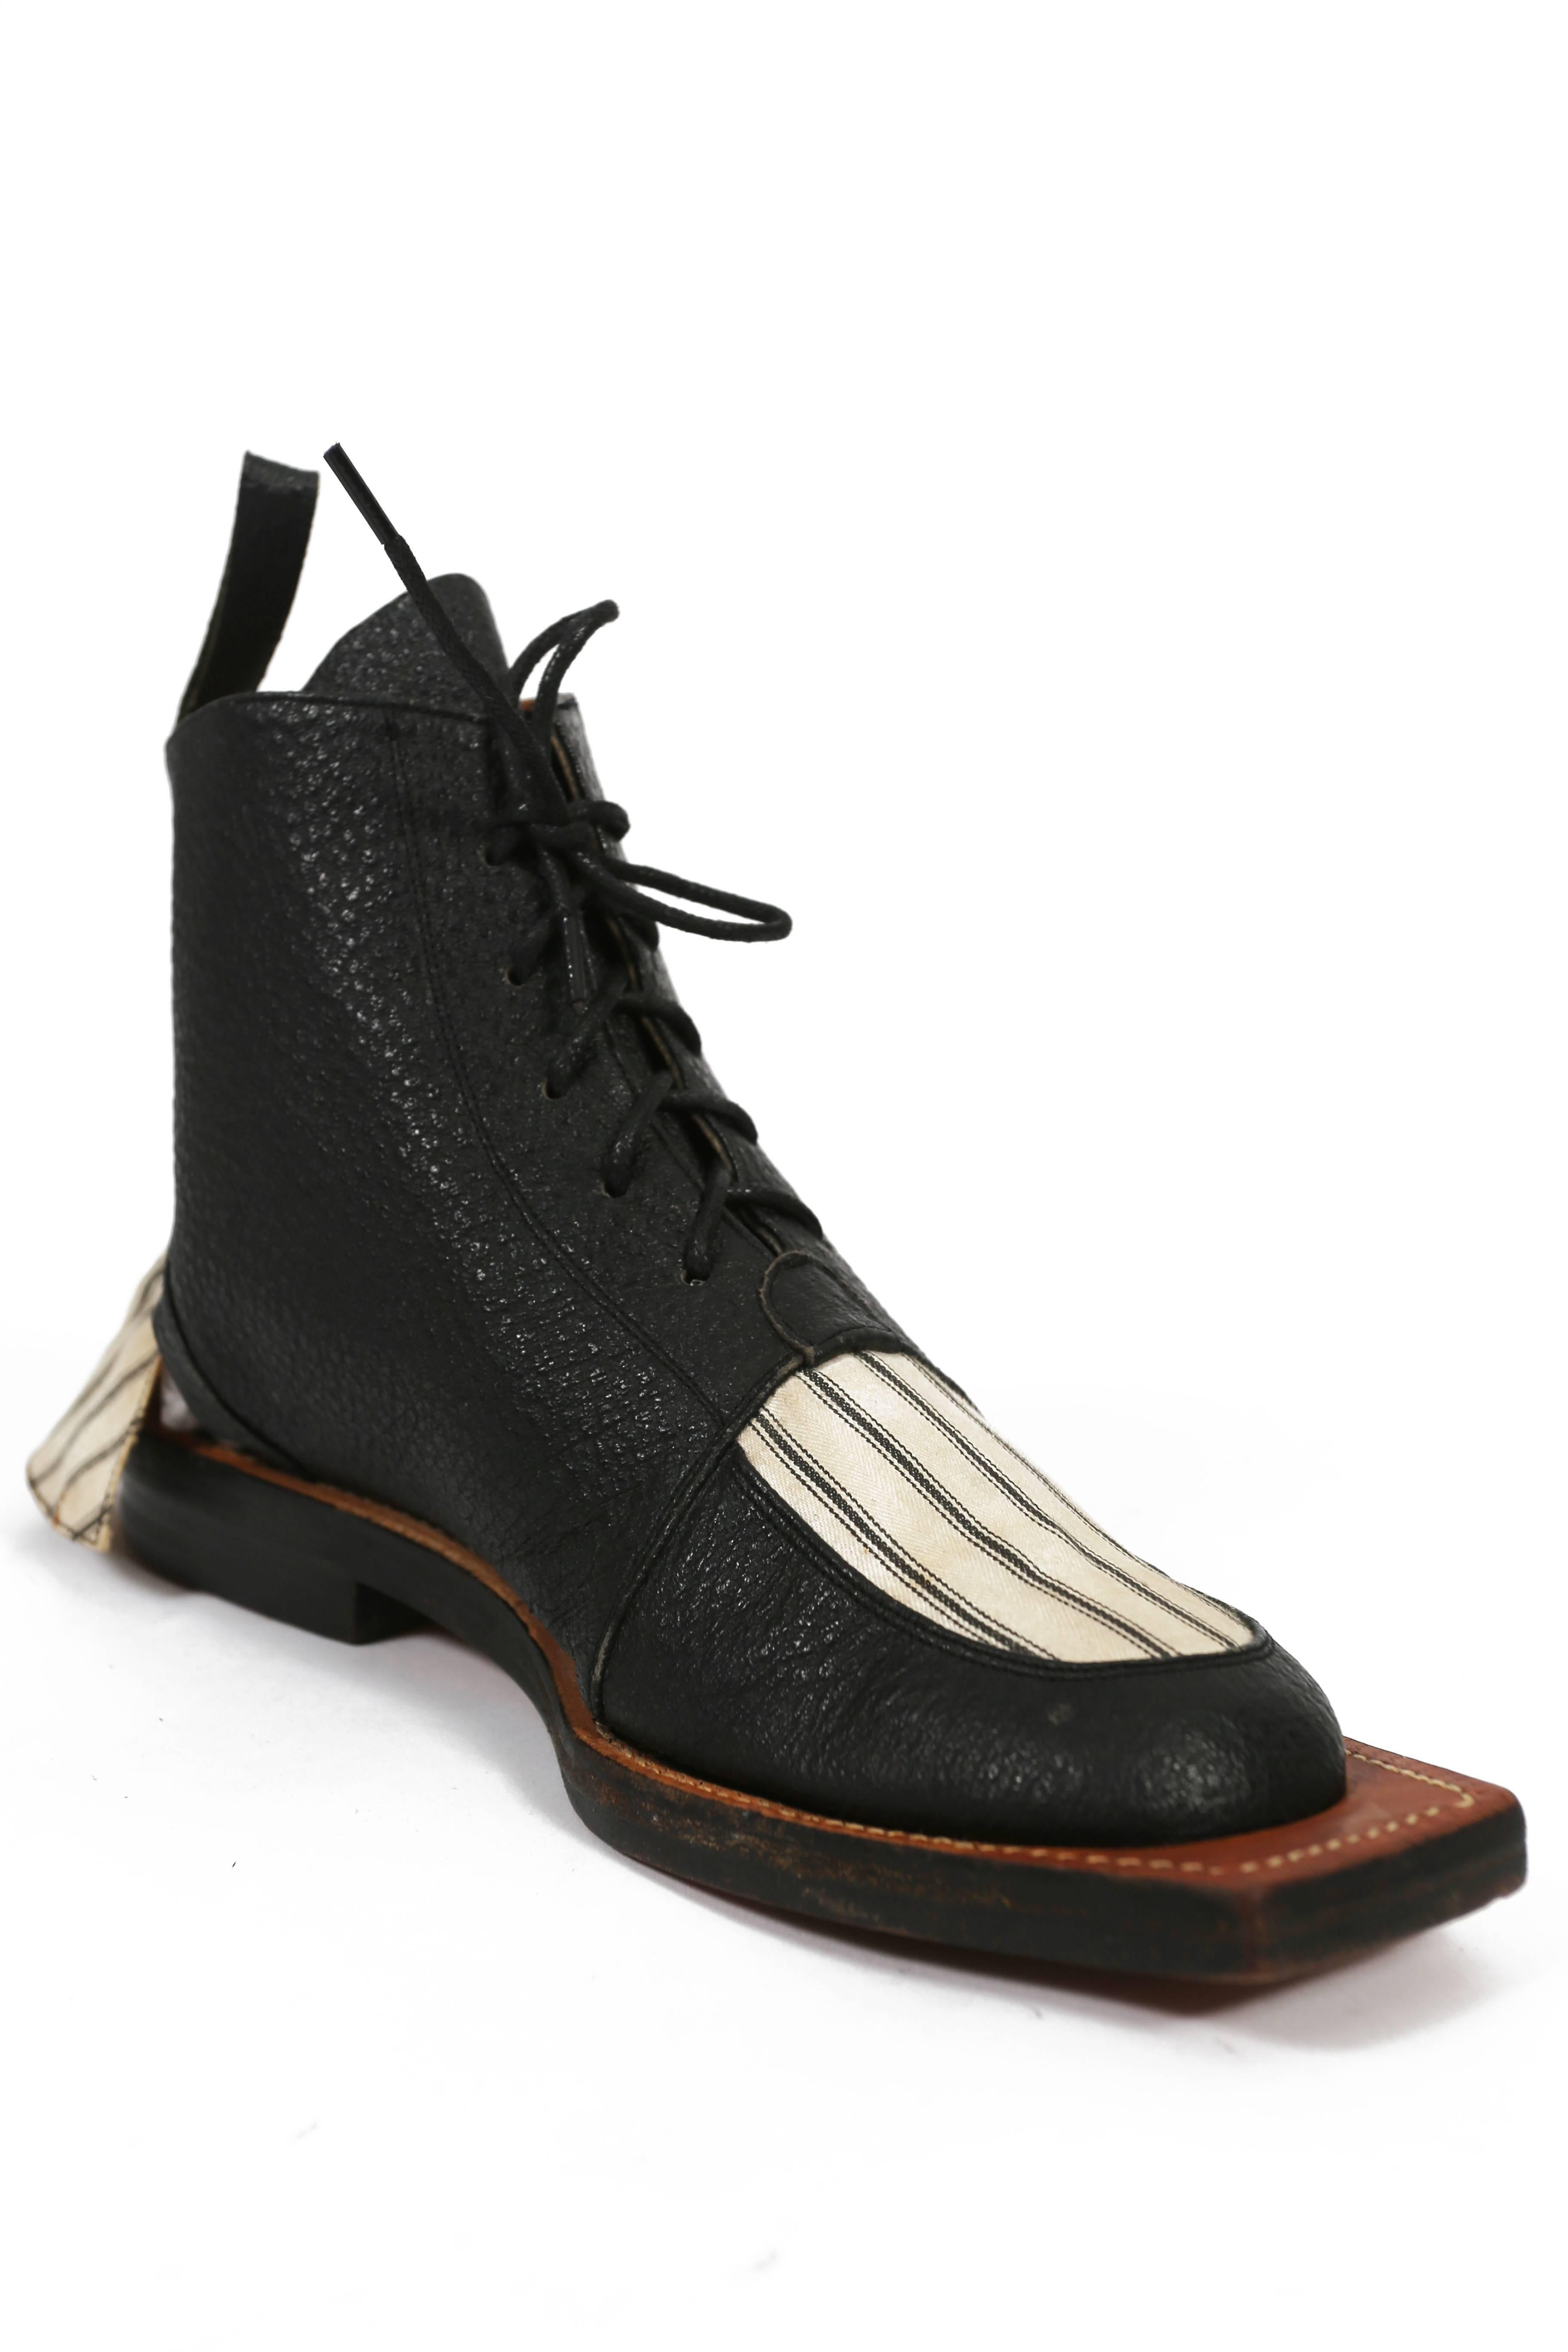 John Galliano 'Fallen Angels' leather and canvas hammerhead boots ...